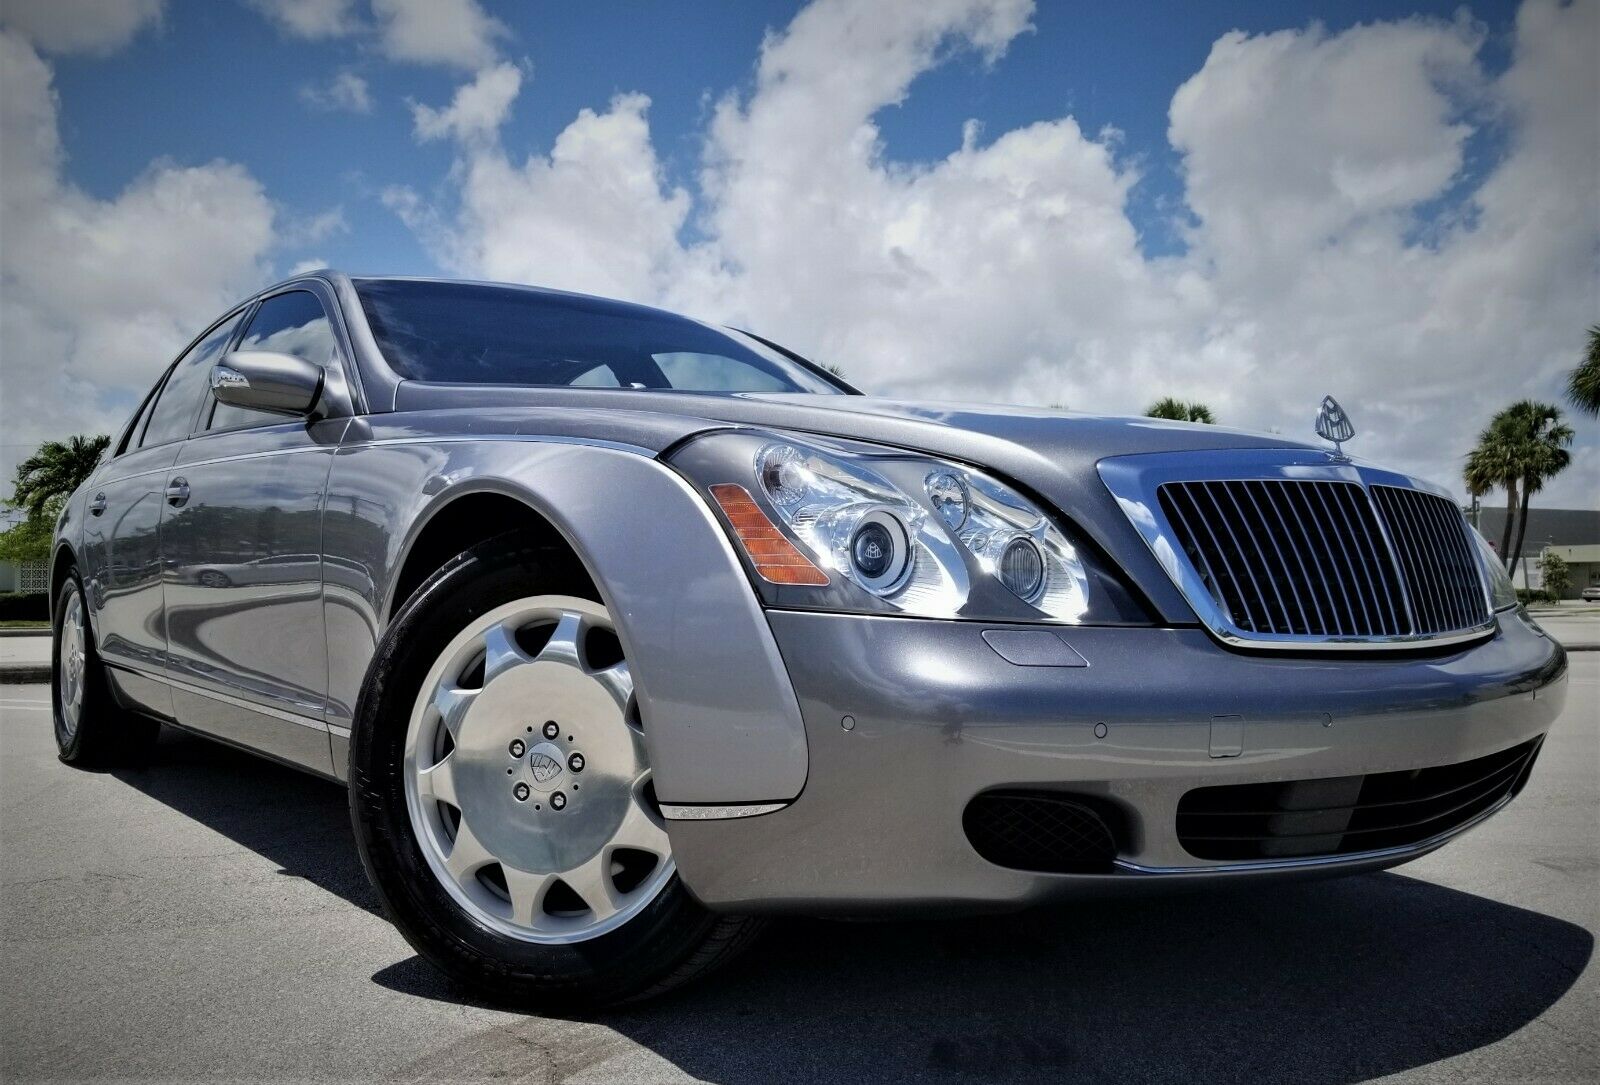 2004 Maybach 57  Carfax Certified, Low Miles, Excellent Service History - Absolutely Stunning!!!